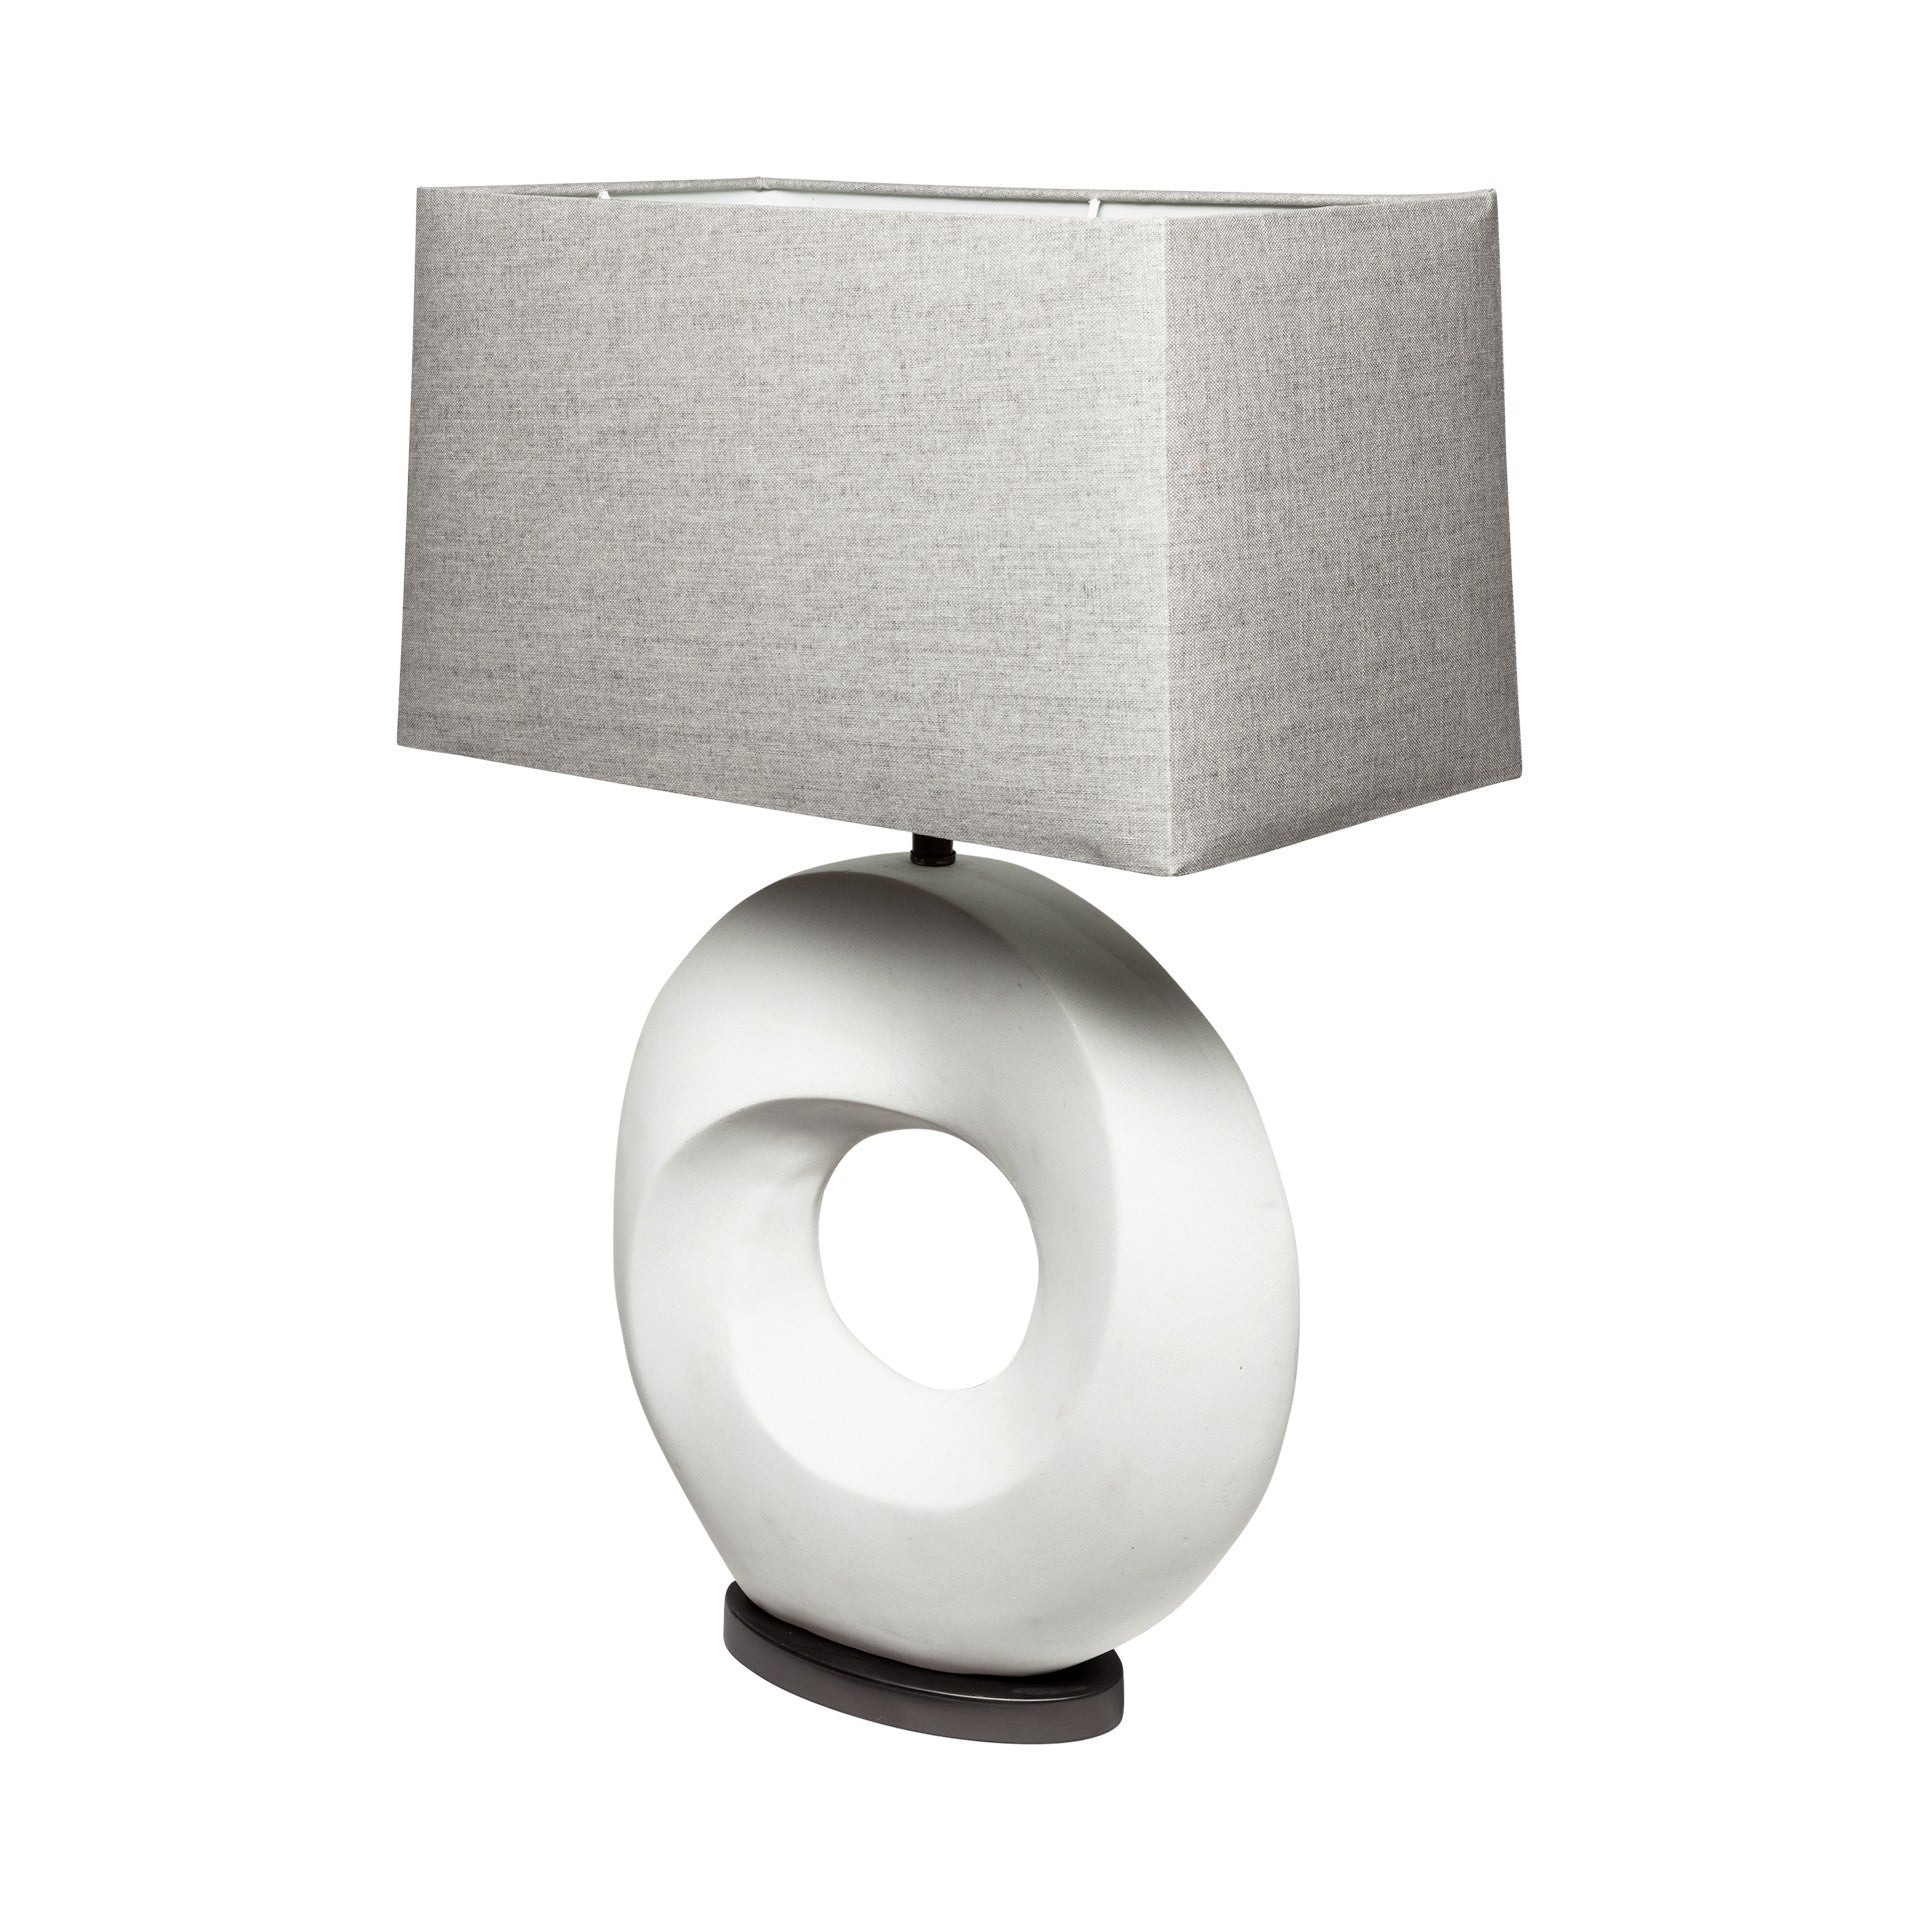 27" White Geometric Table Lamp With Gray Shade